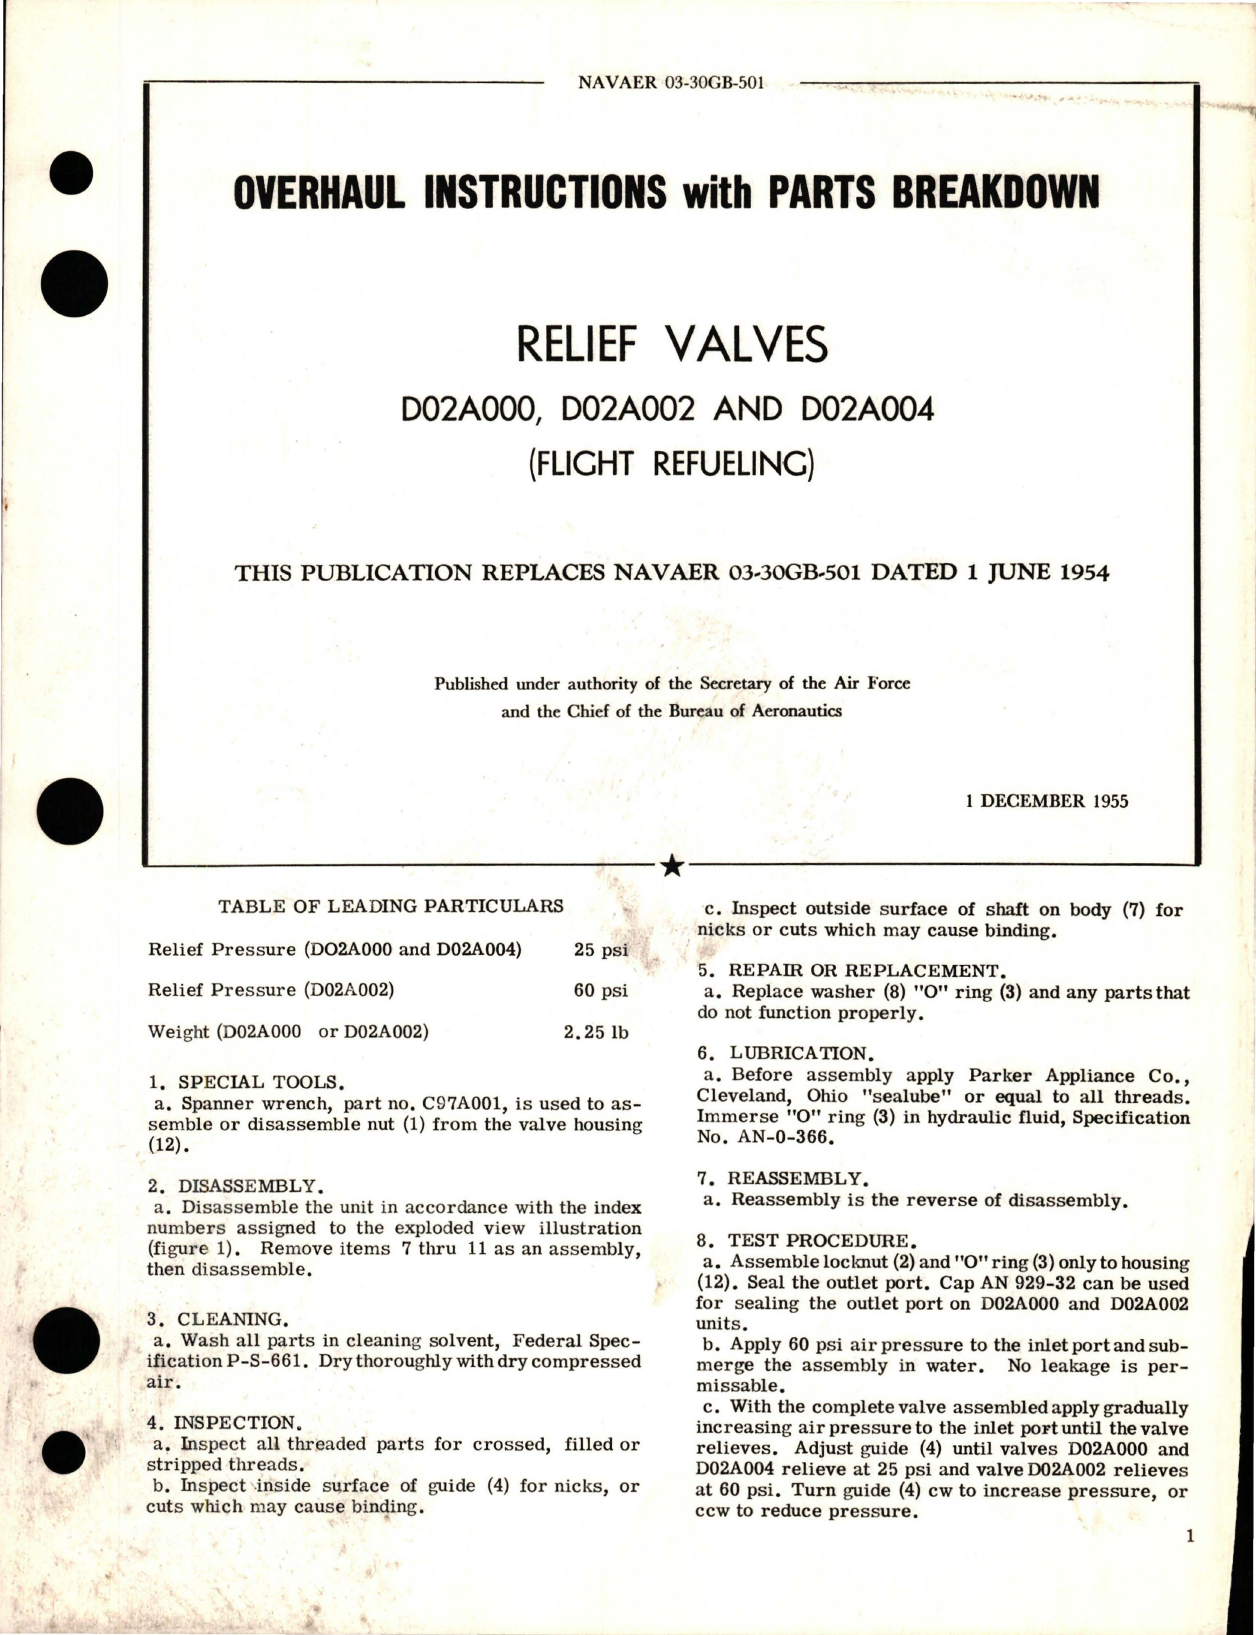 Sample page 1 from AirCorps Library document: Overhaul Instructions with Parts Breakdown for Relief Valves - D02A000, D02A002, and D02A004 